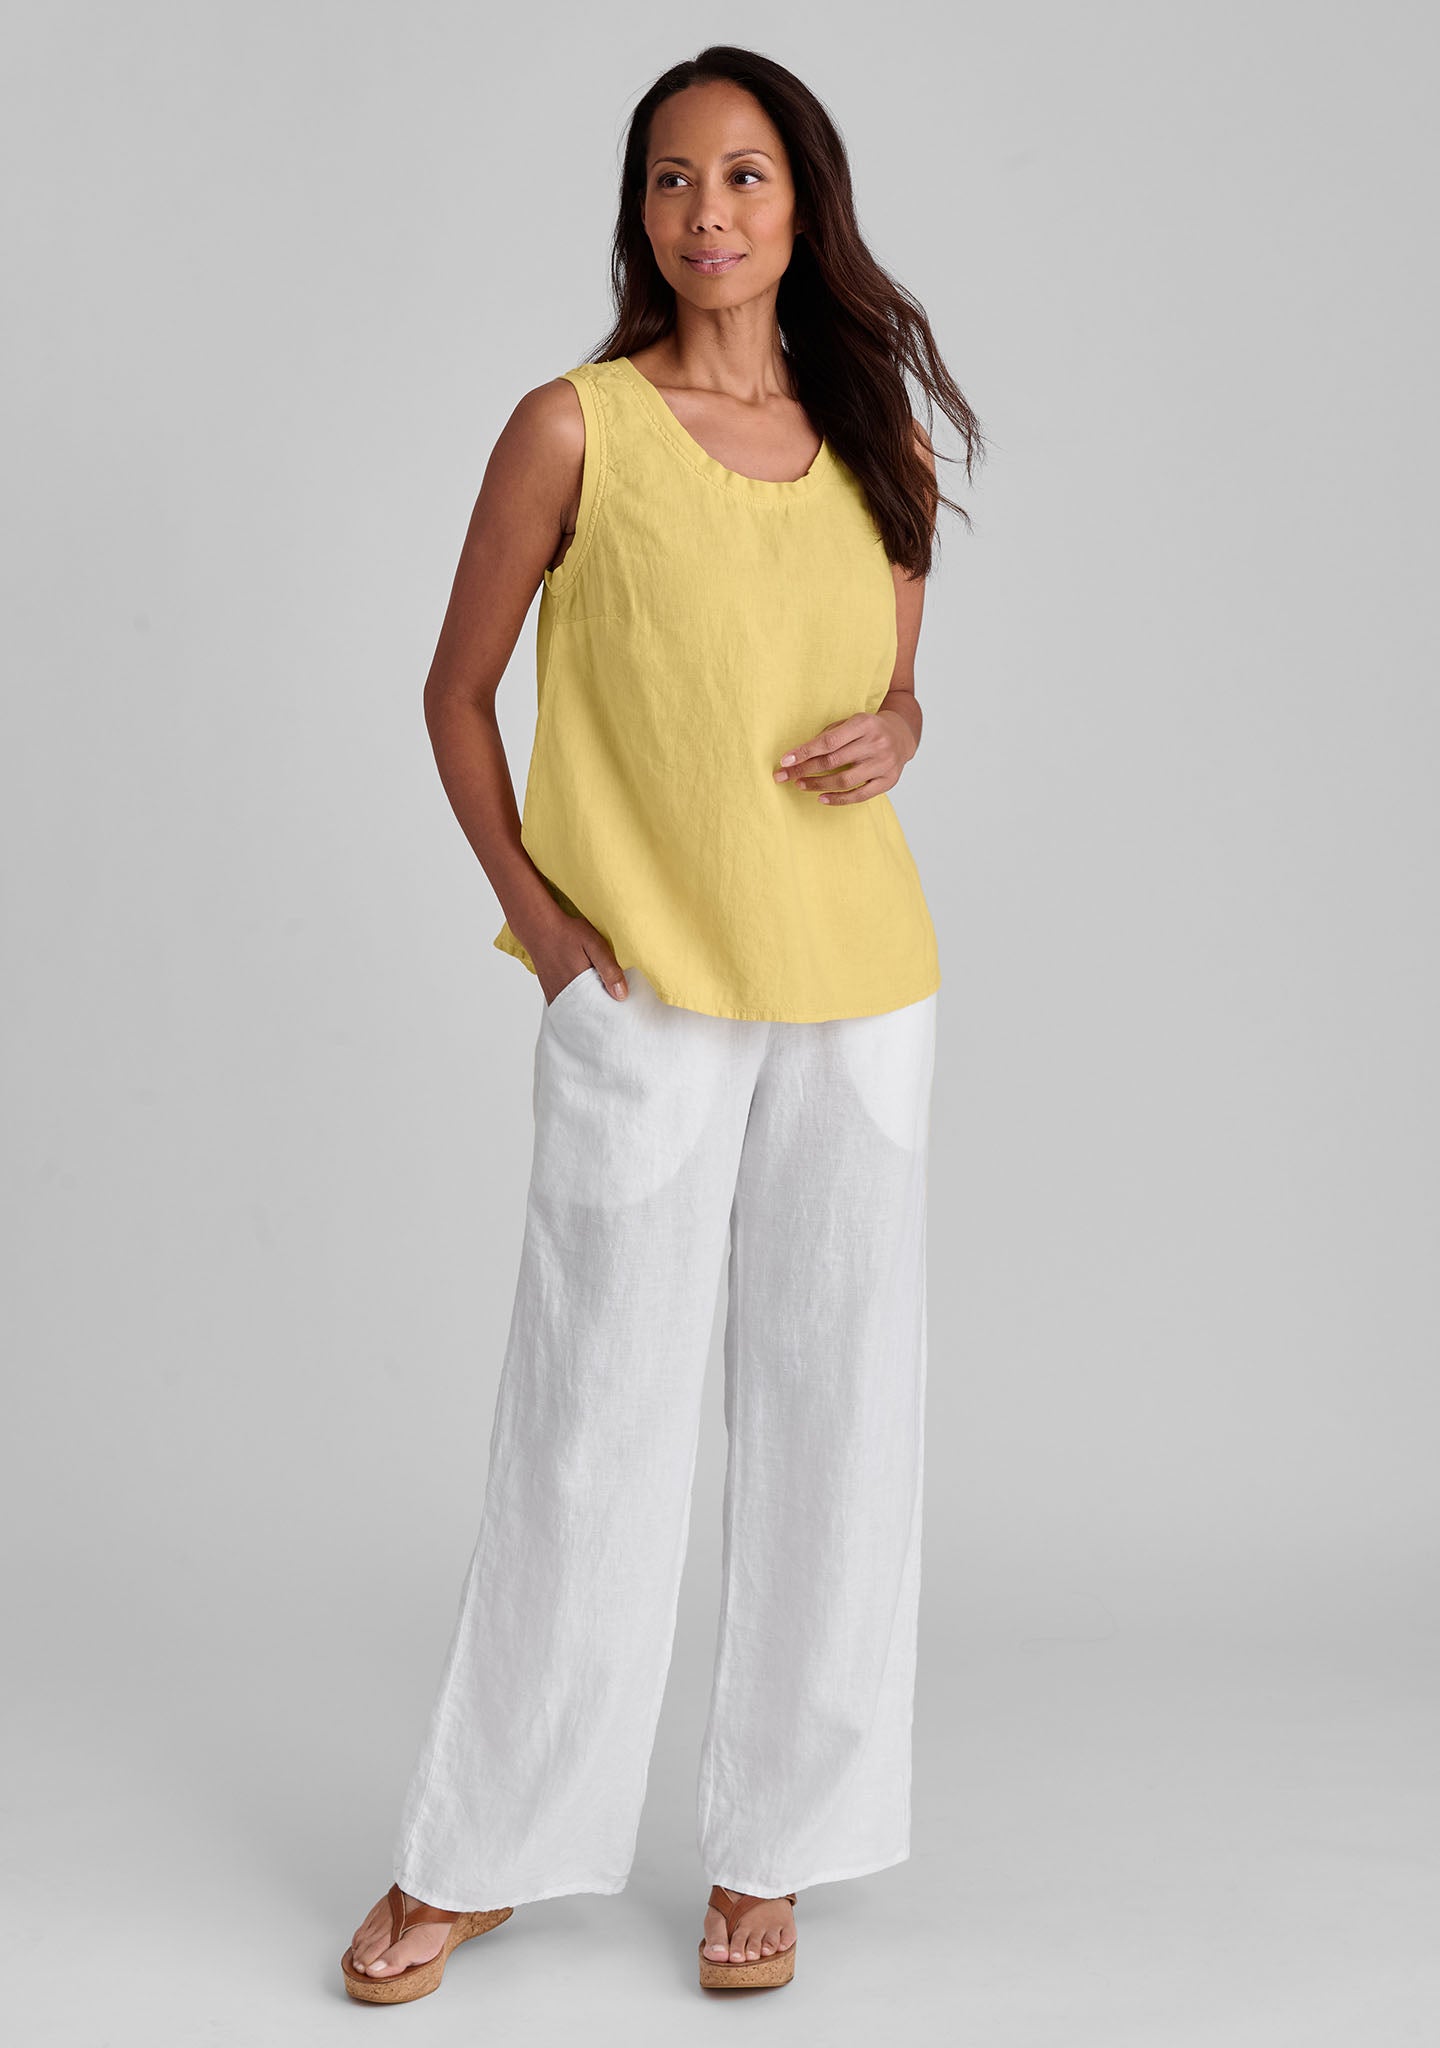 FLAX linen tank in yellow with linen pants in white